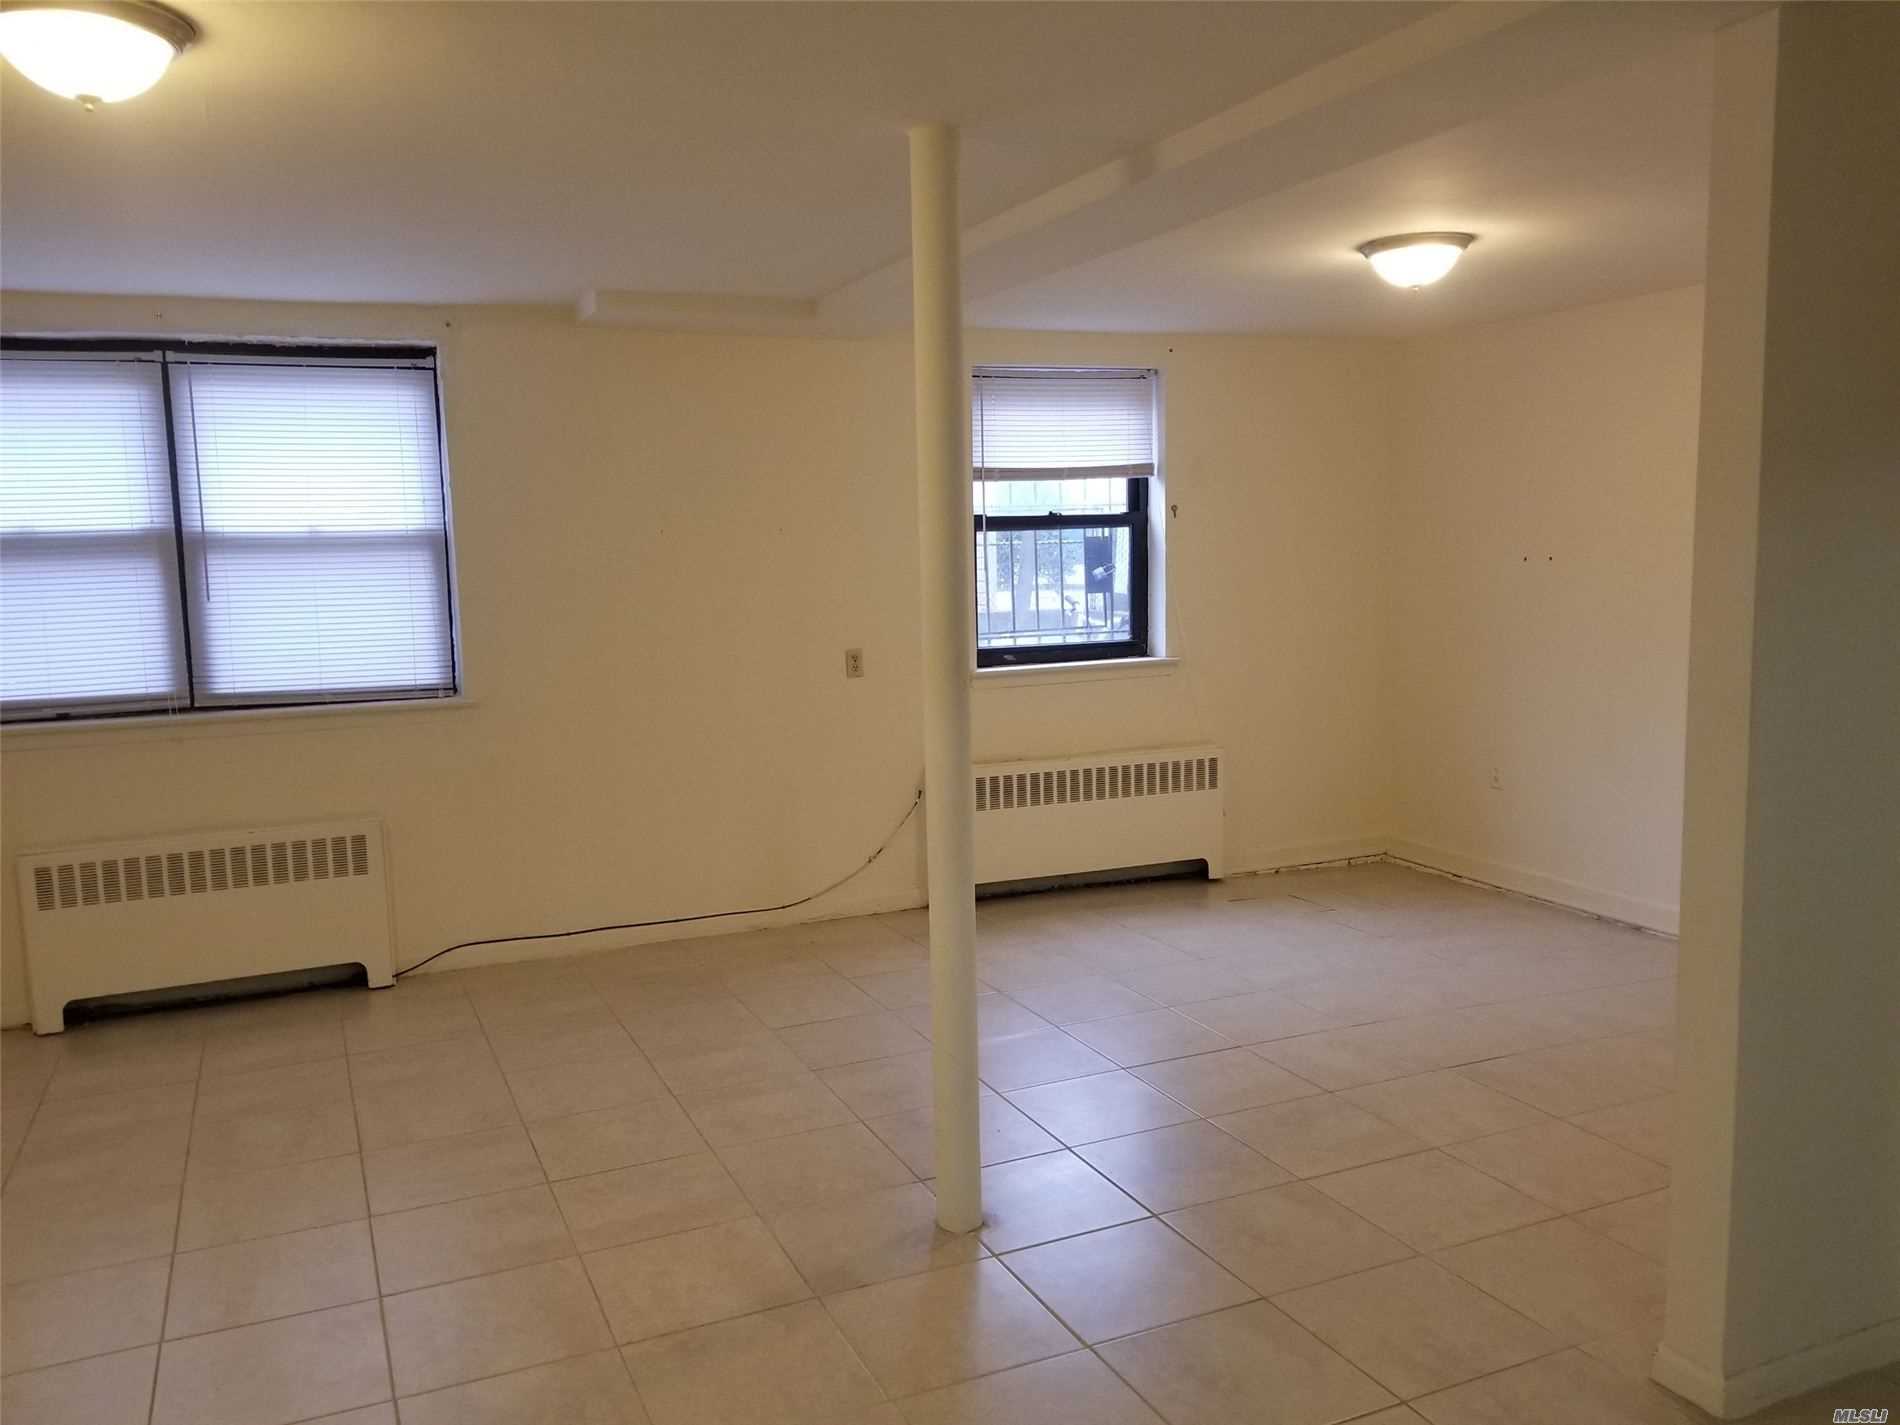 Large Alcove Studio for Rent in Whitestone. Features Living Area, Kitchen & 1 Full Bath. Coin-Operated Washer/Dryer in Building. Conveniently Located Near Shopping & Transportation.